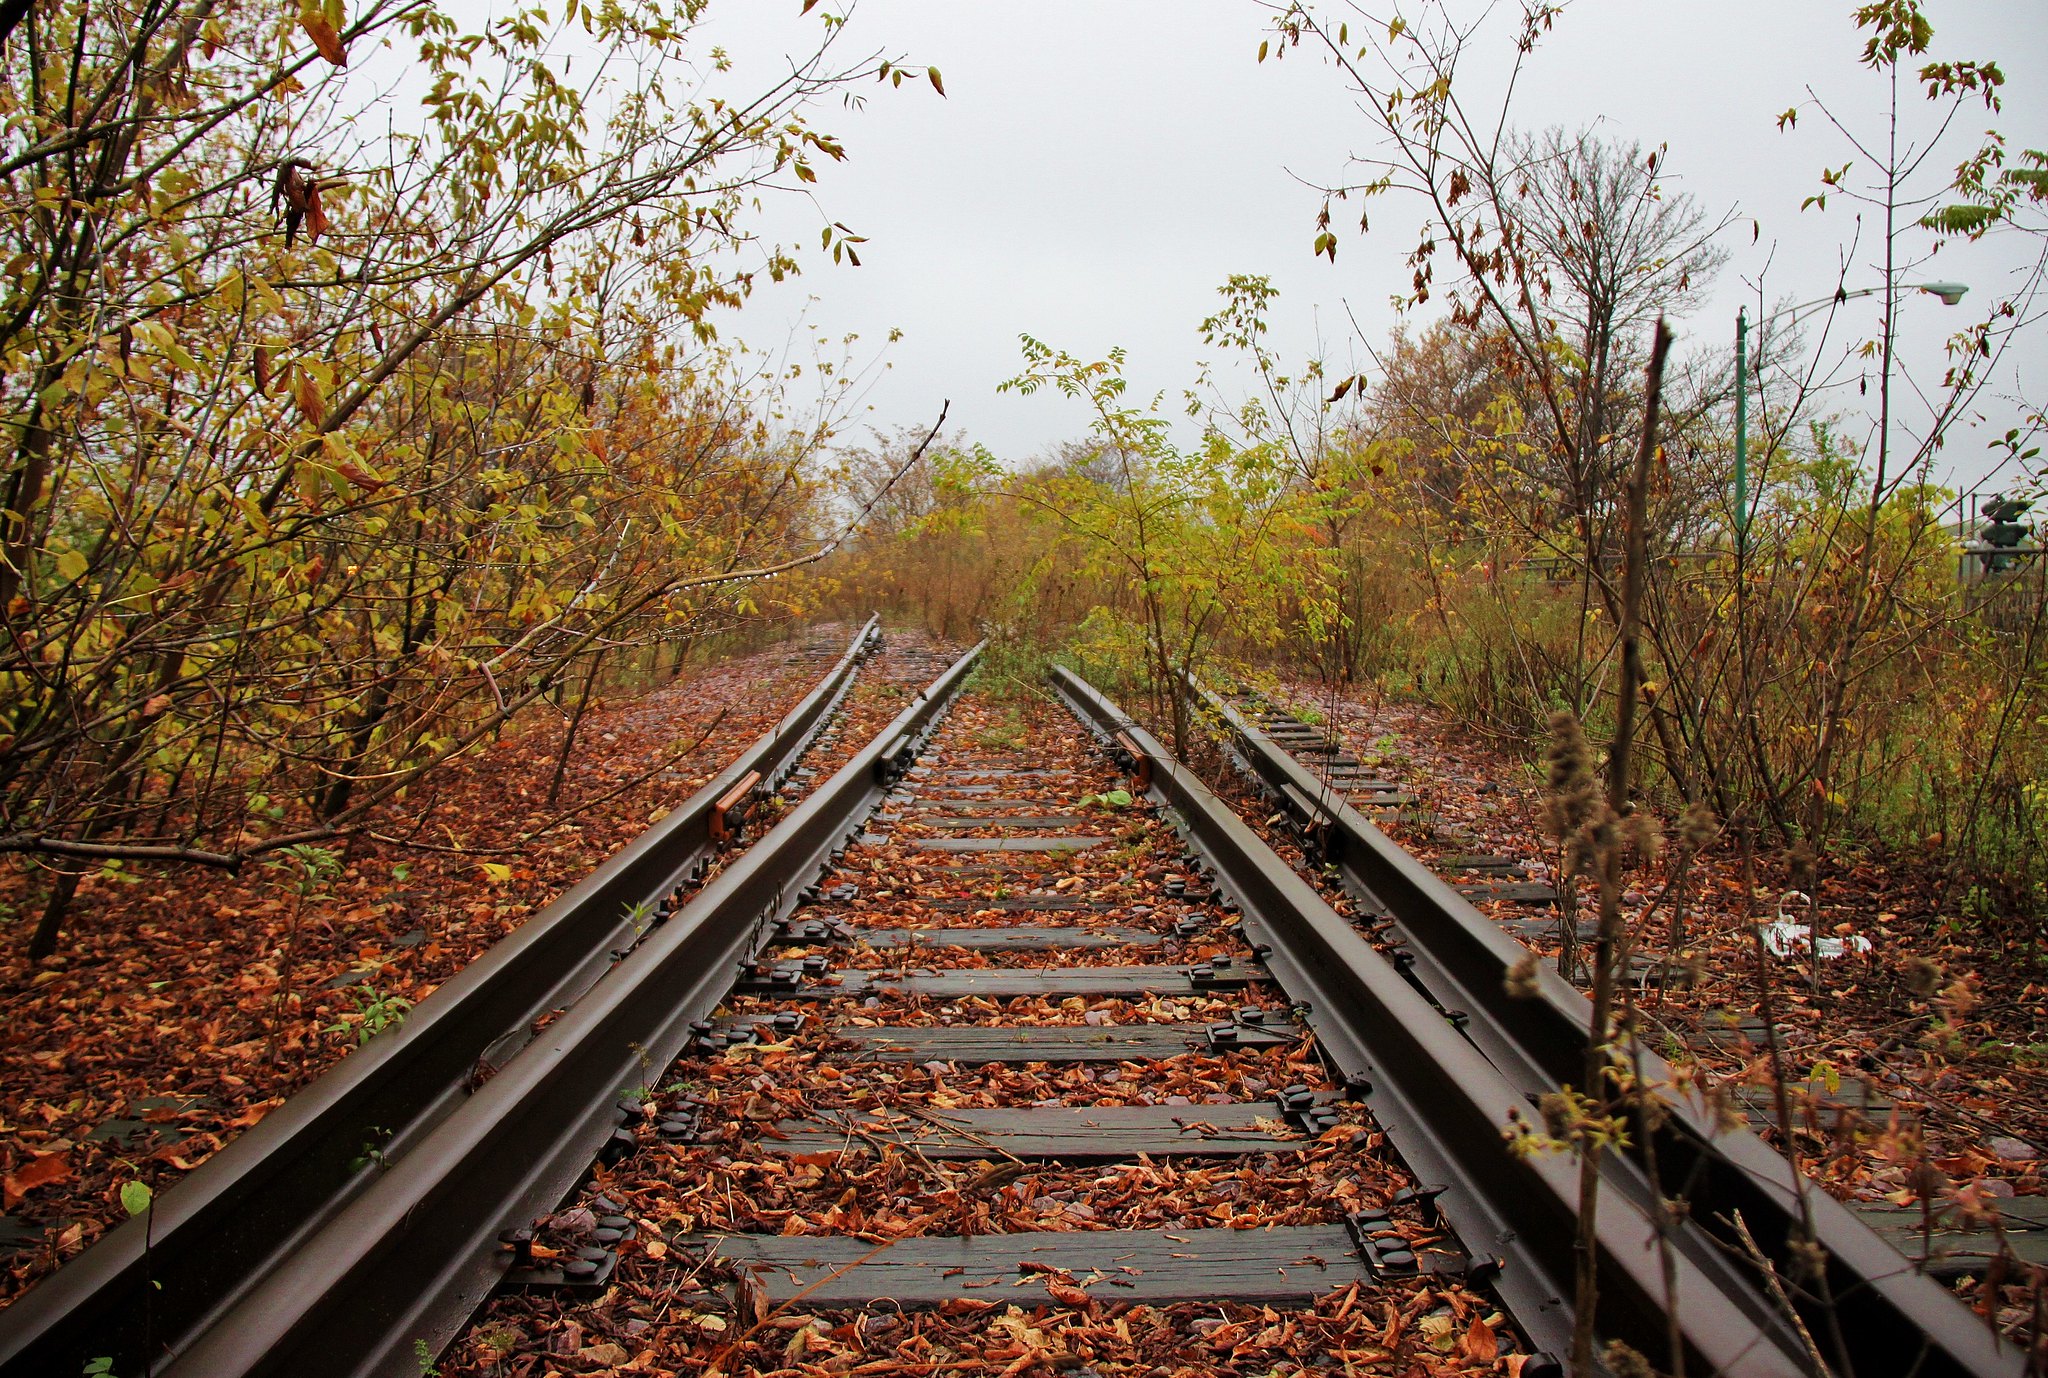 Old Rusty Rails Of An Abandoned Railway Stock Photo 